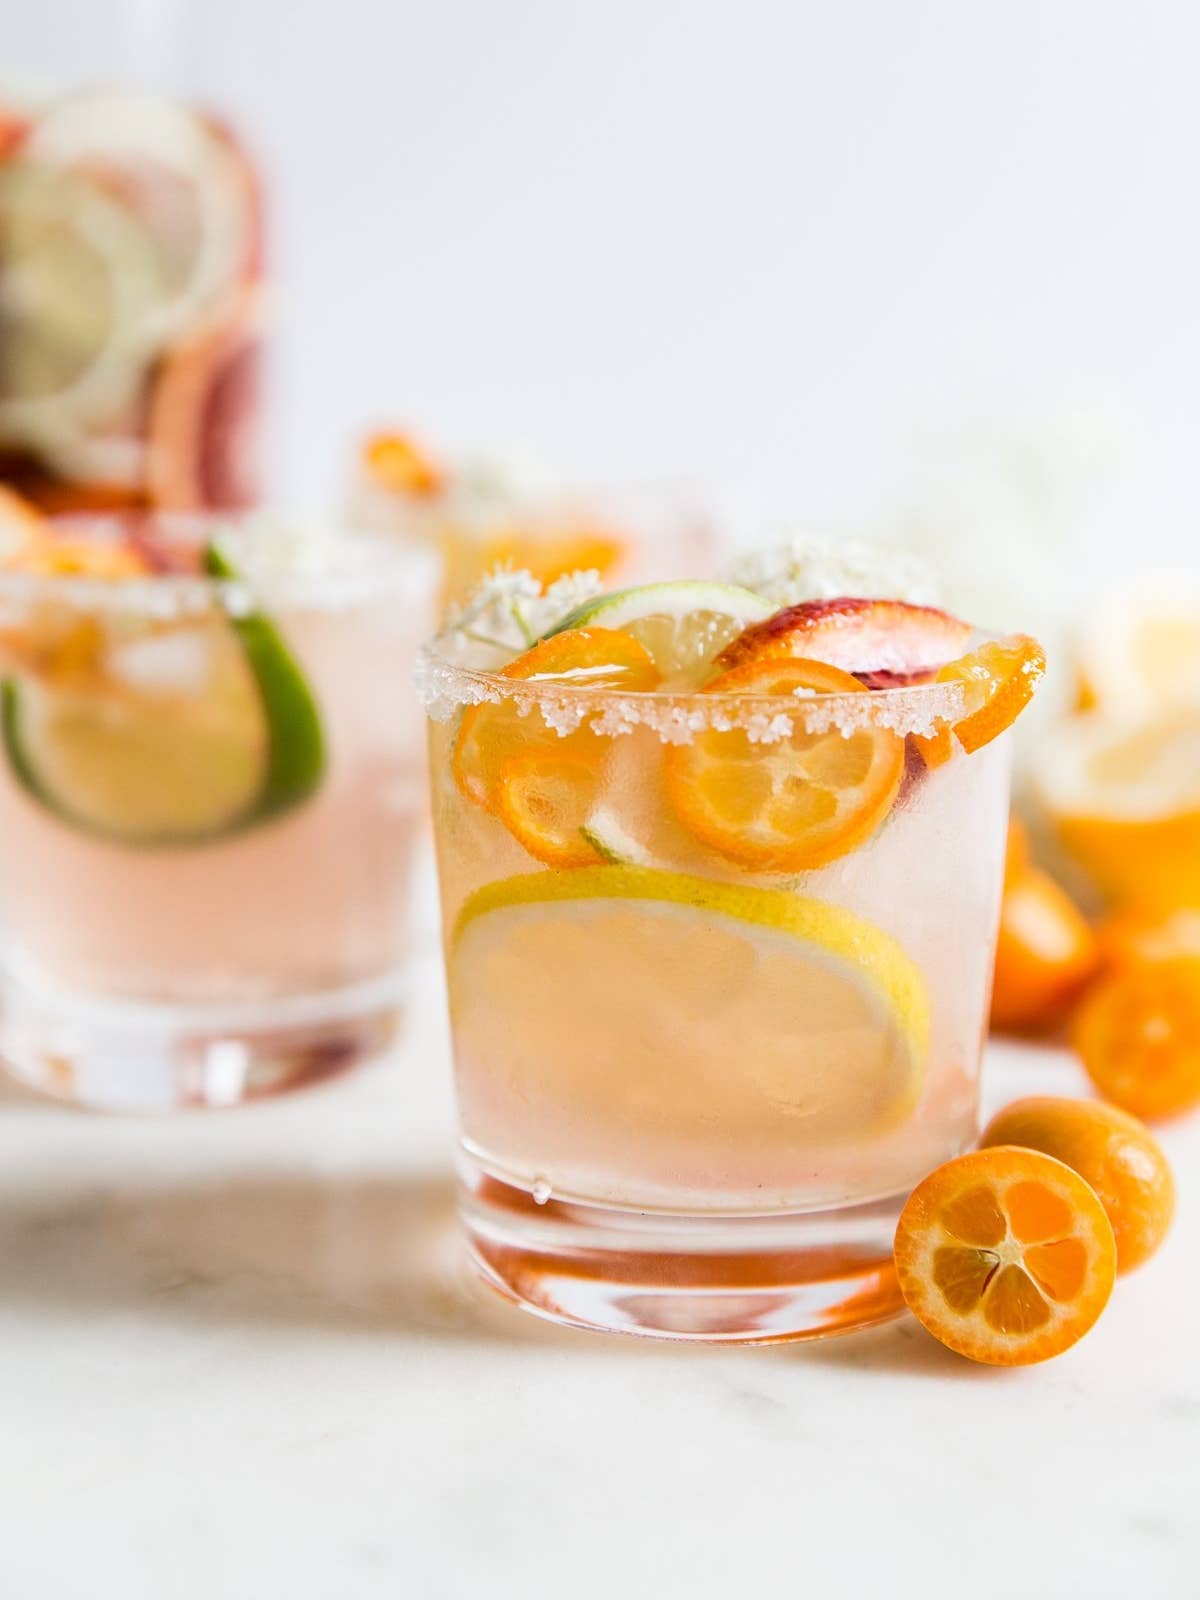 7 Refreshing Rosé Drink Recipes That’ll Make Your Summer Water Taste That Much Better